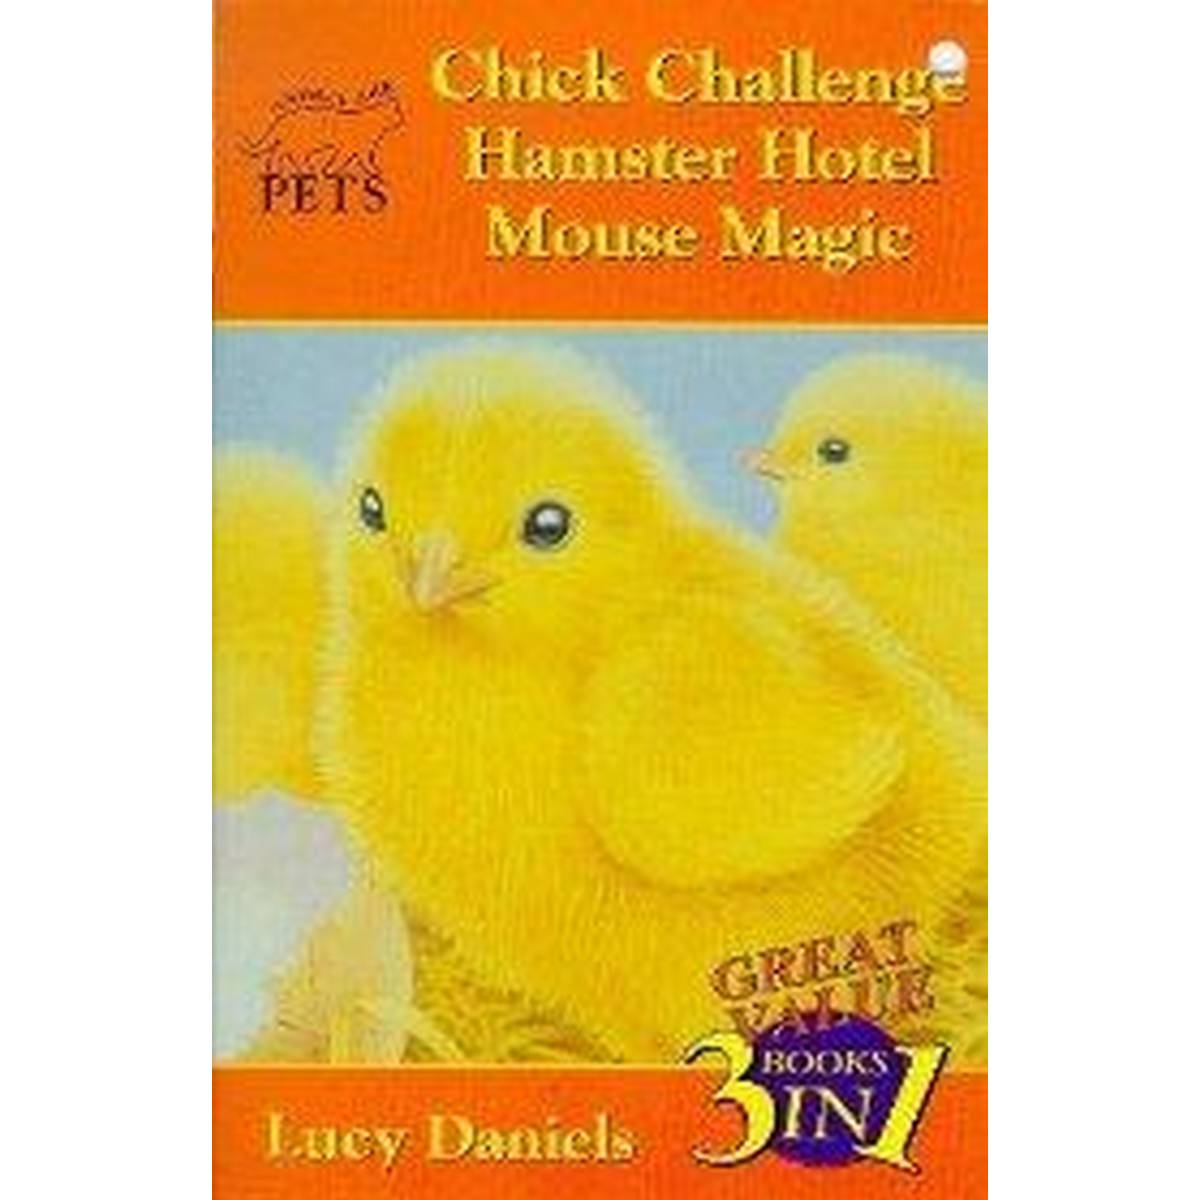 Hamster Hotel/Mouse Magic/Chick ChallengeAnimal Ark Pets 3-in-1 Collection 2: